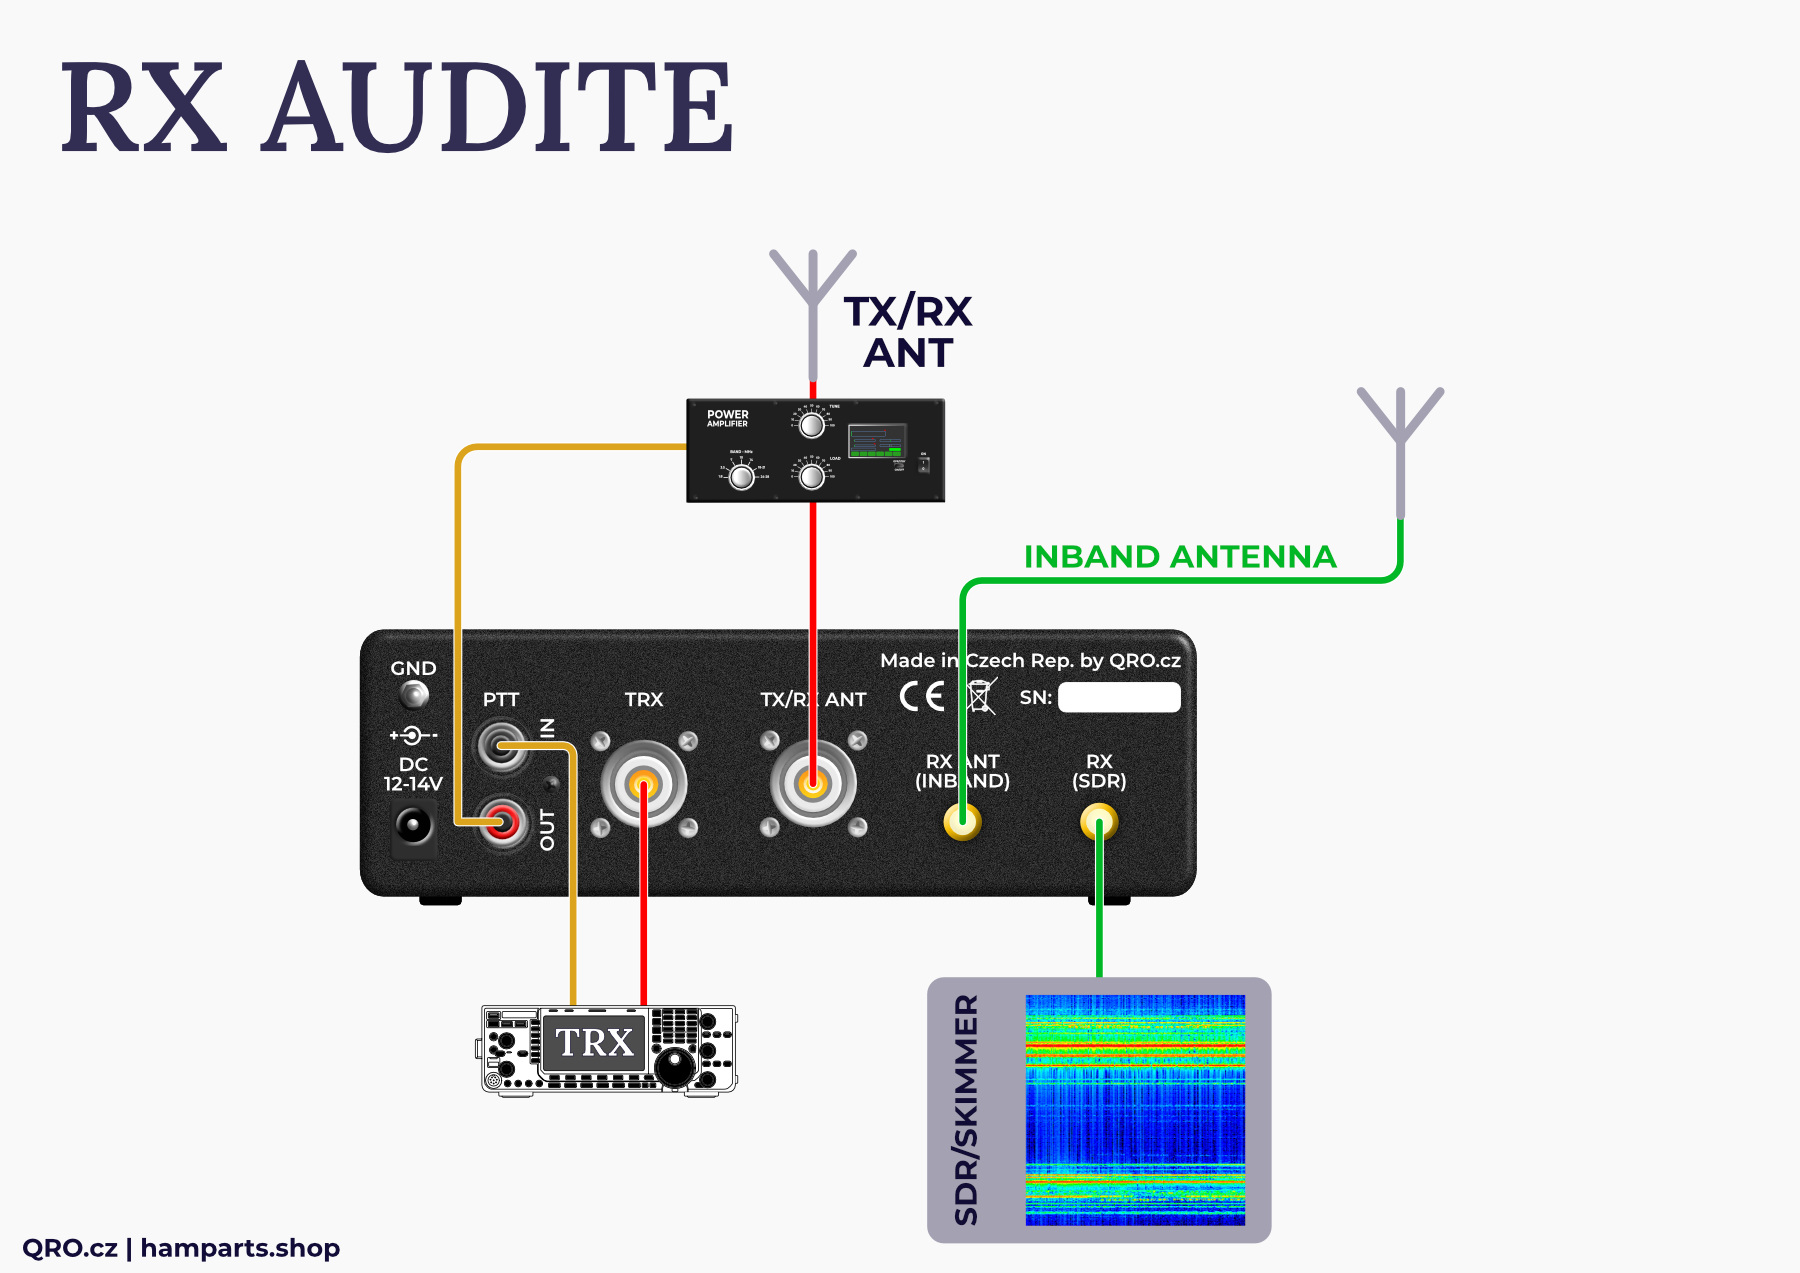 rx audite sdr switch by qro.cz hamparts.shop